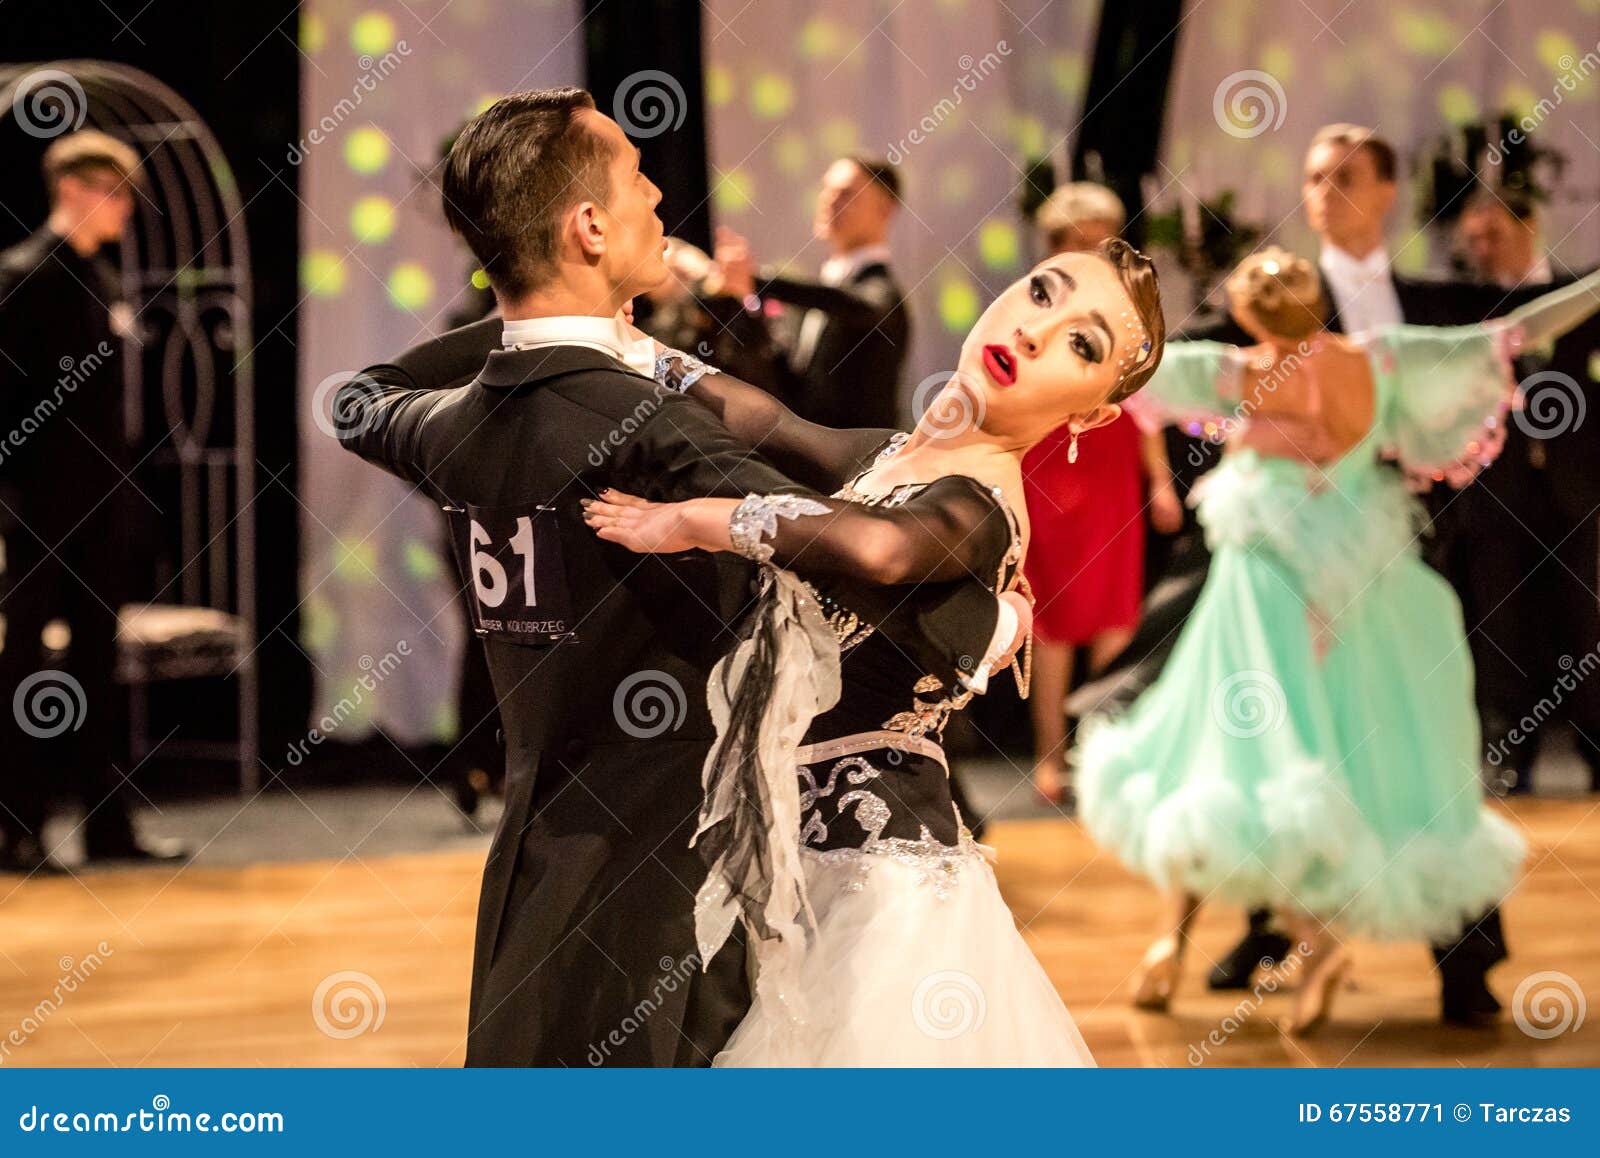 Competitors Dancing Slow Waltz or Tango Editorial Photo - Image of ...